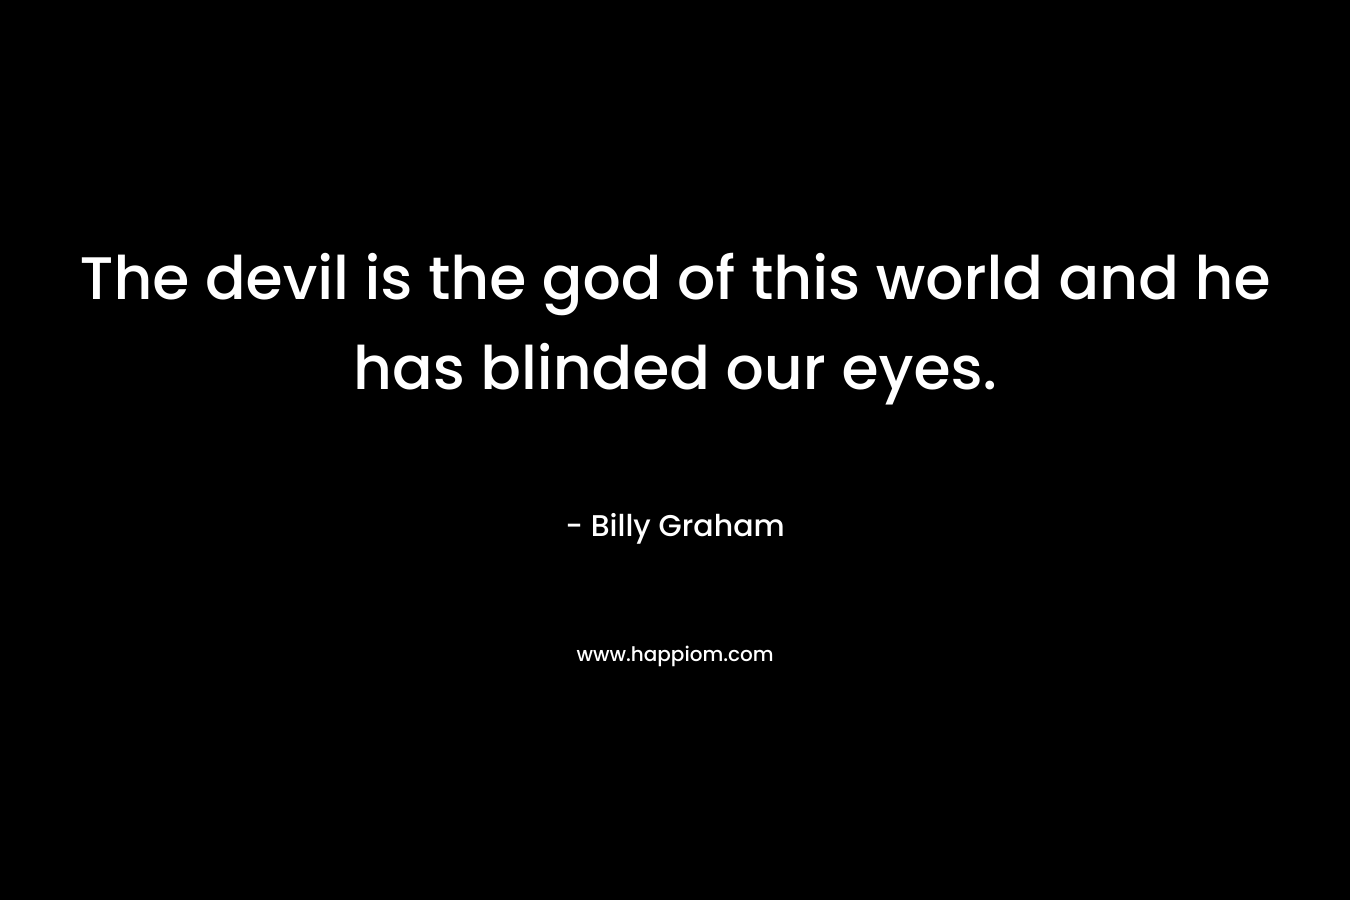 The devil is the god of this world and he has blinded our eyes.